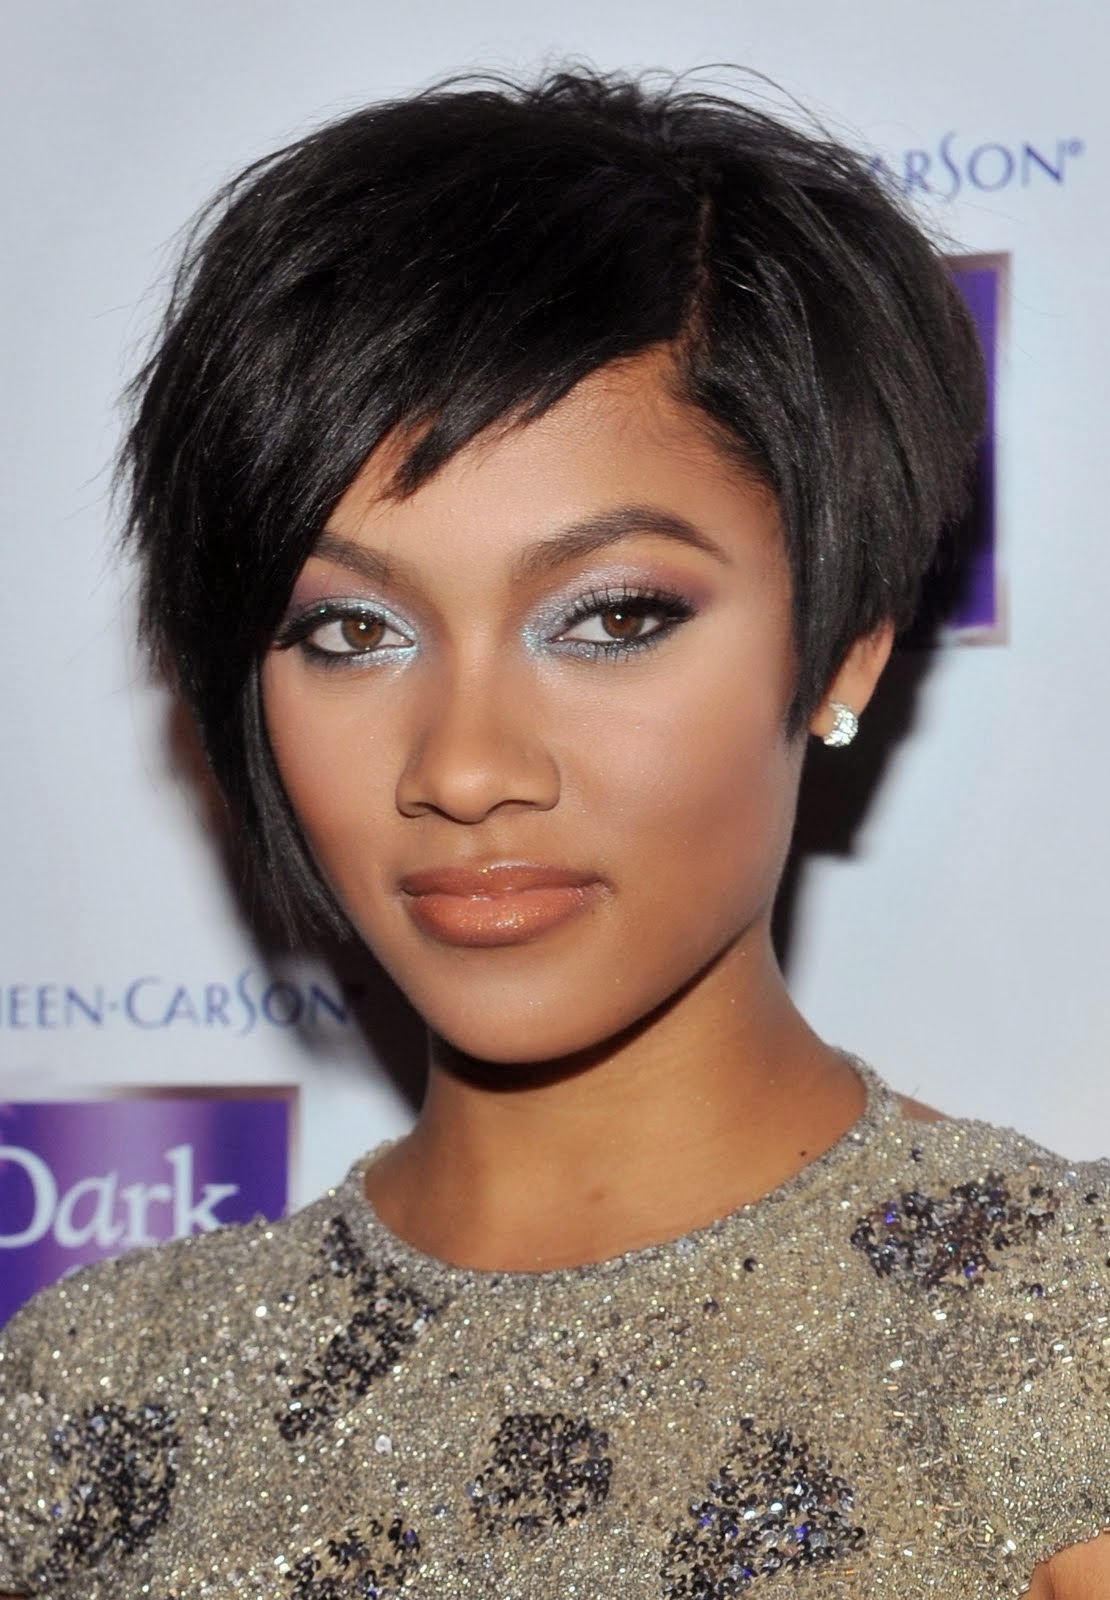 hairstyles for short hair for prom Hairstyles for Black Women